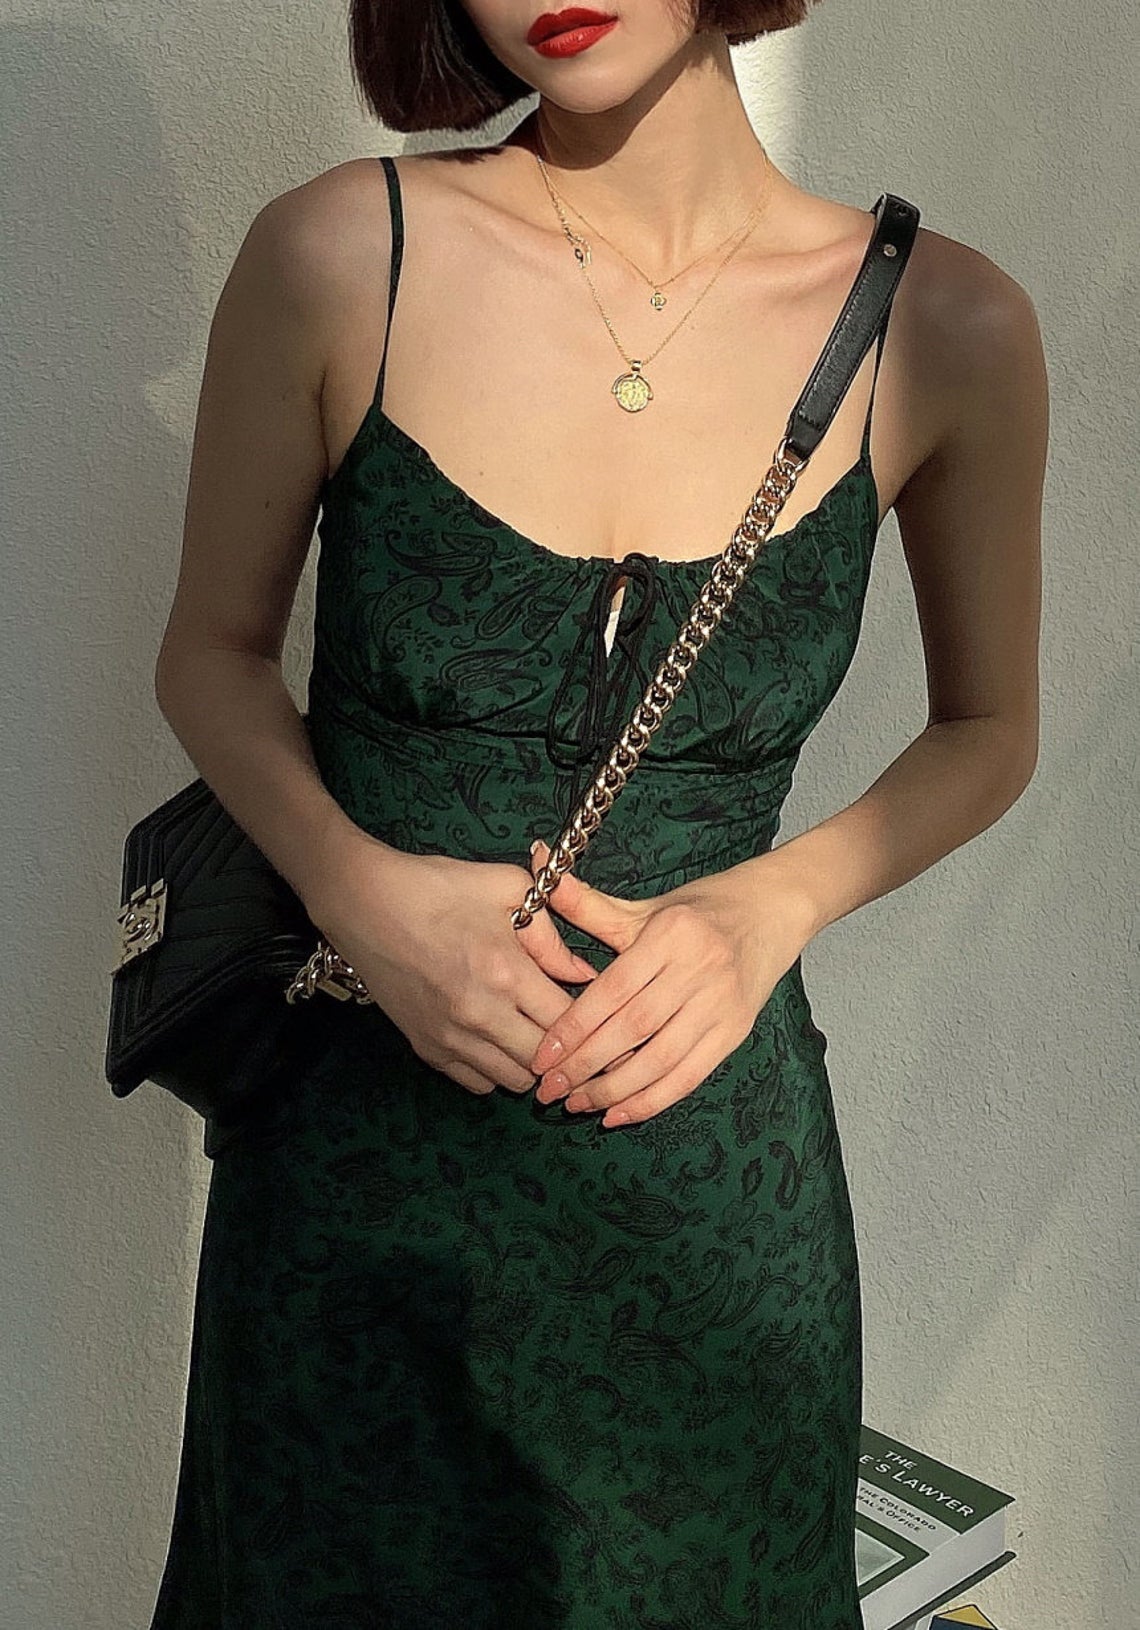 NoNothing | Luxurious silk slip dress in green floral print